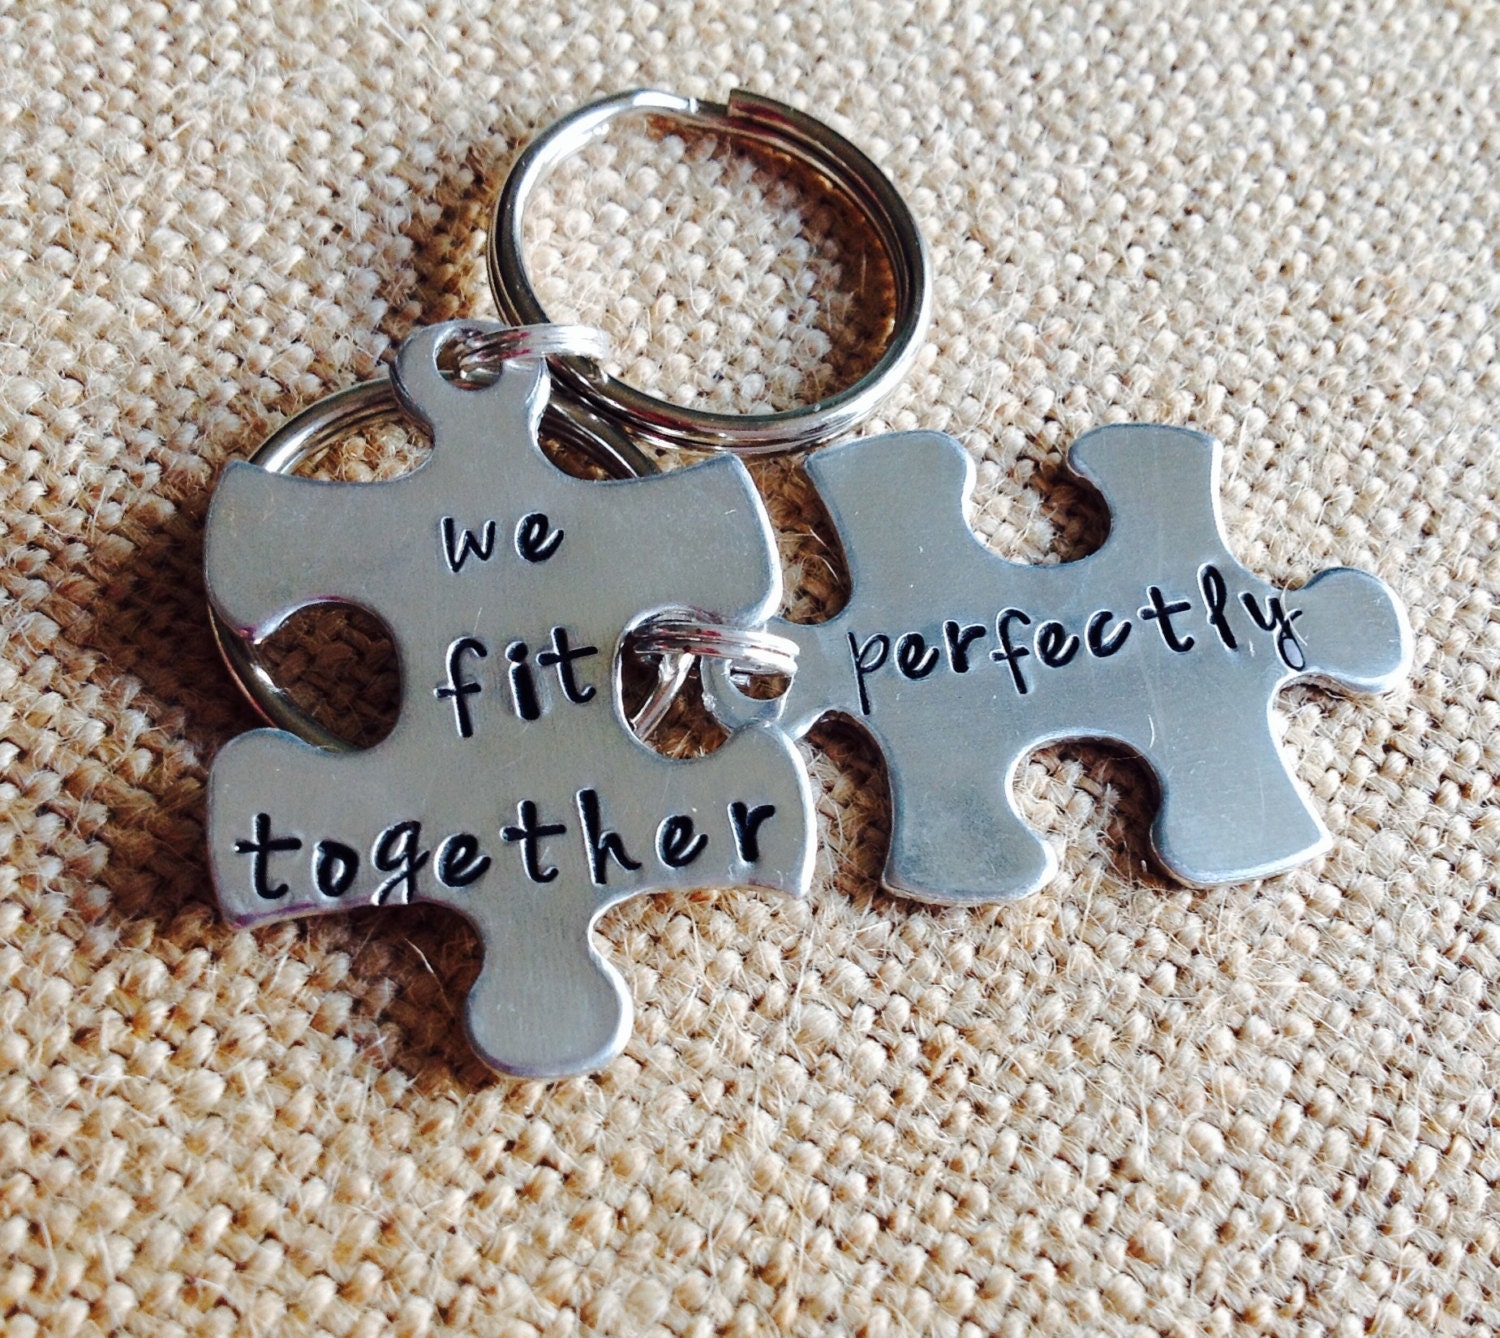 Matching Keychains for Couples❤️ Link in Bio #gym #wheyprotein